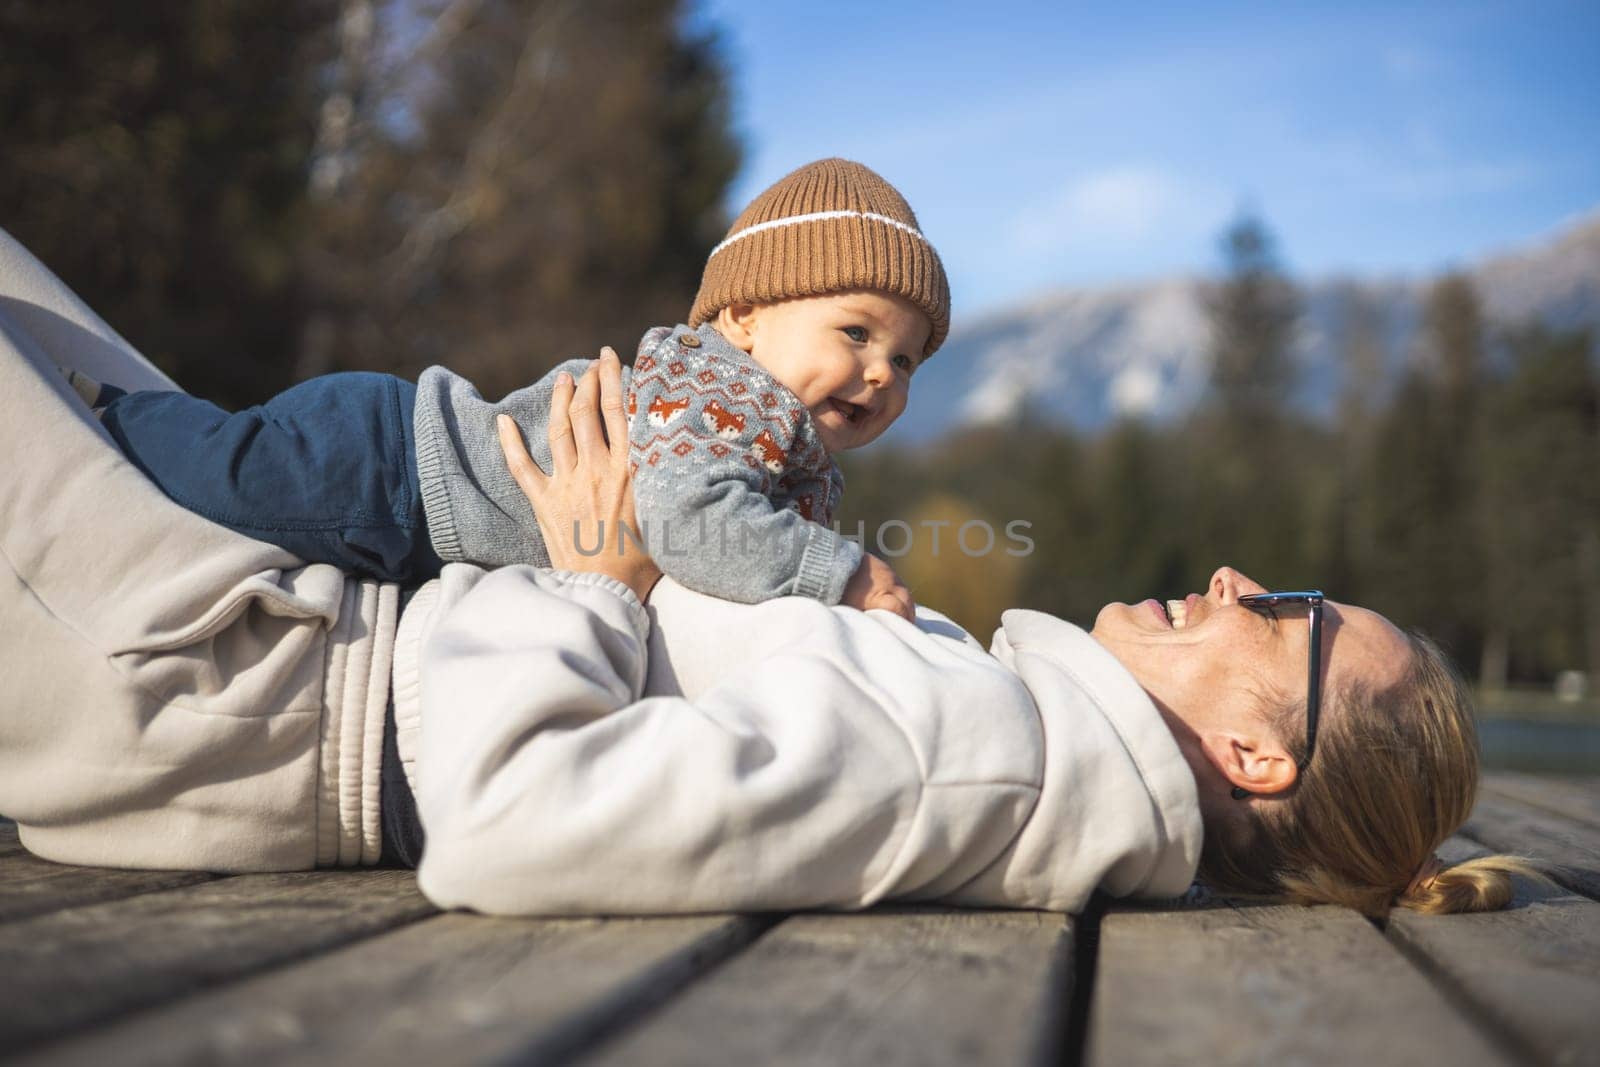 Happy family. Young mother playing with her baby boy infant oudoors on sunny autumn day. Portrait of mom and little son on wooden platform by lake. Positive human emotions, feelings, joy